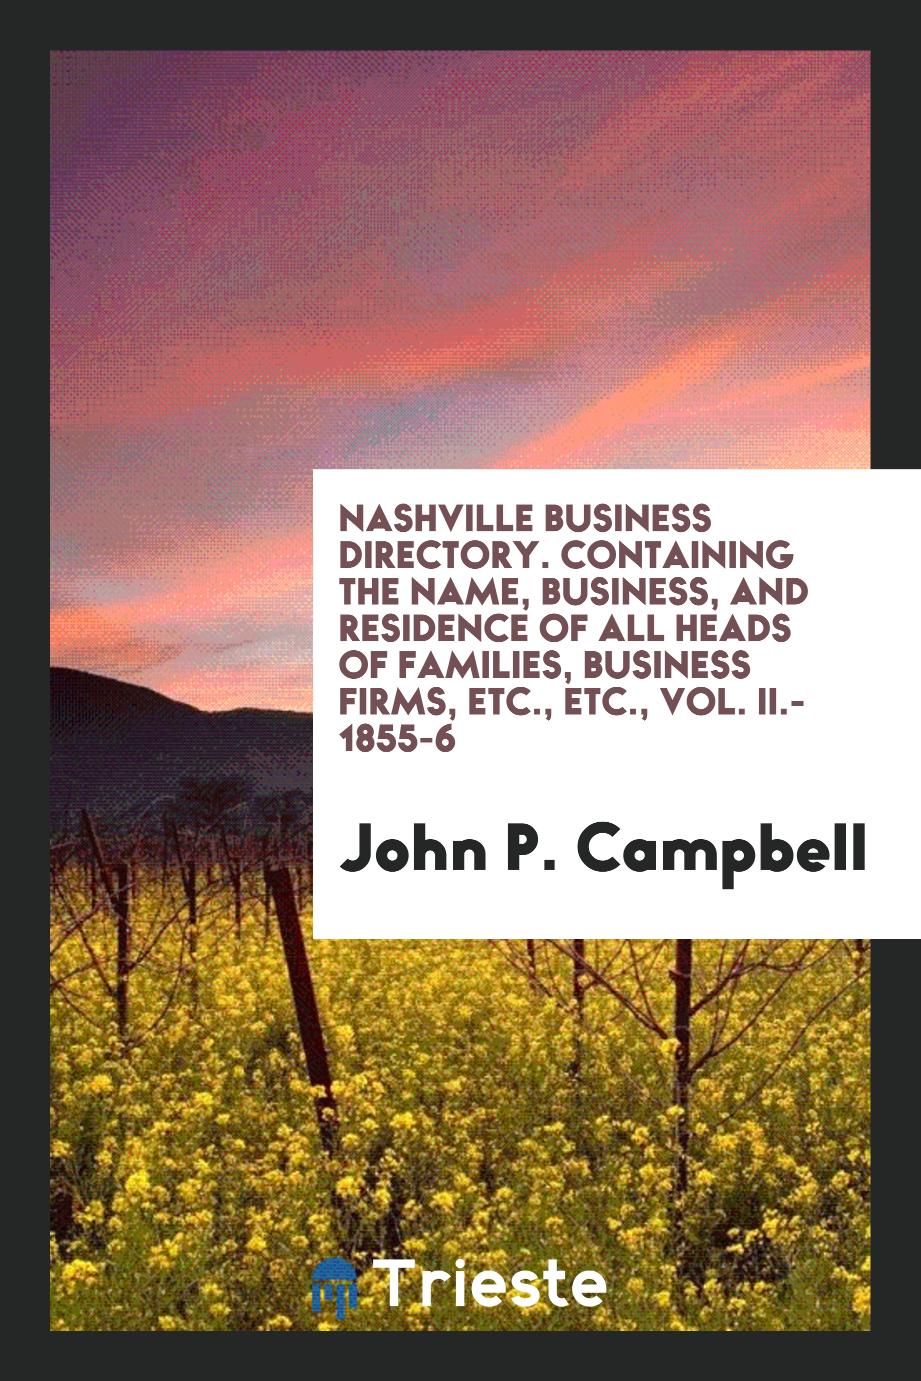 Nashville Business Directory. Containing the Name, Business, and Residence of All Heads of Families, Business Firms, Etc., Etc., Vol. II.- 1855-6